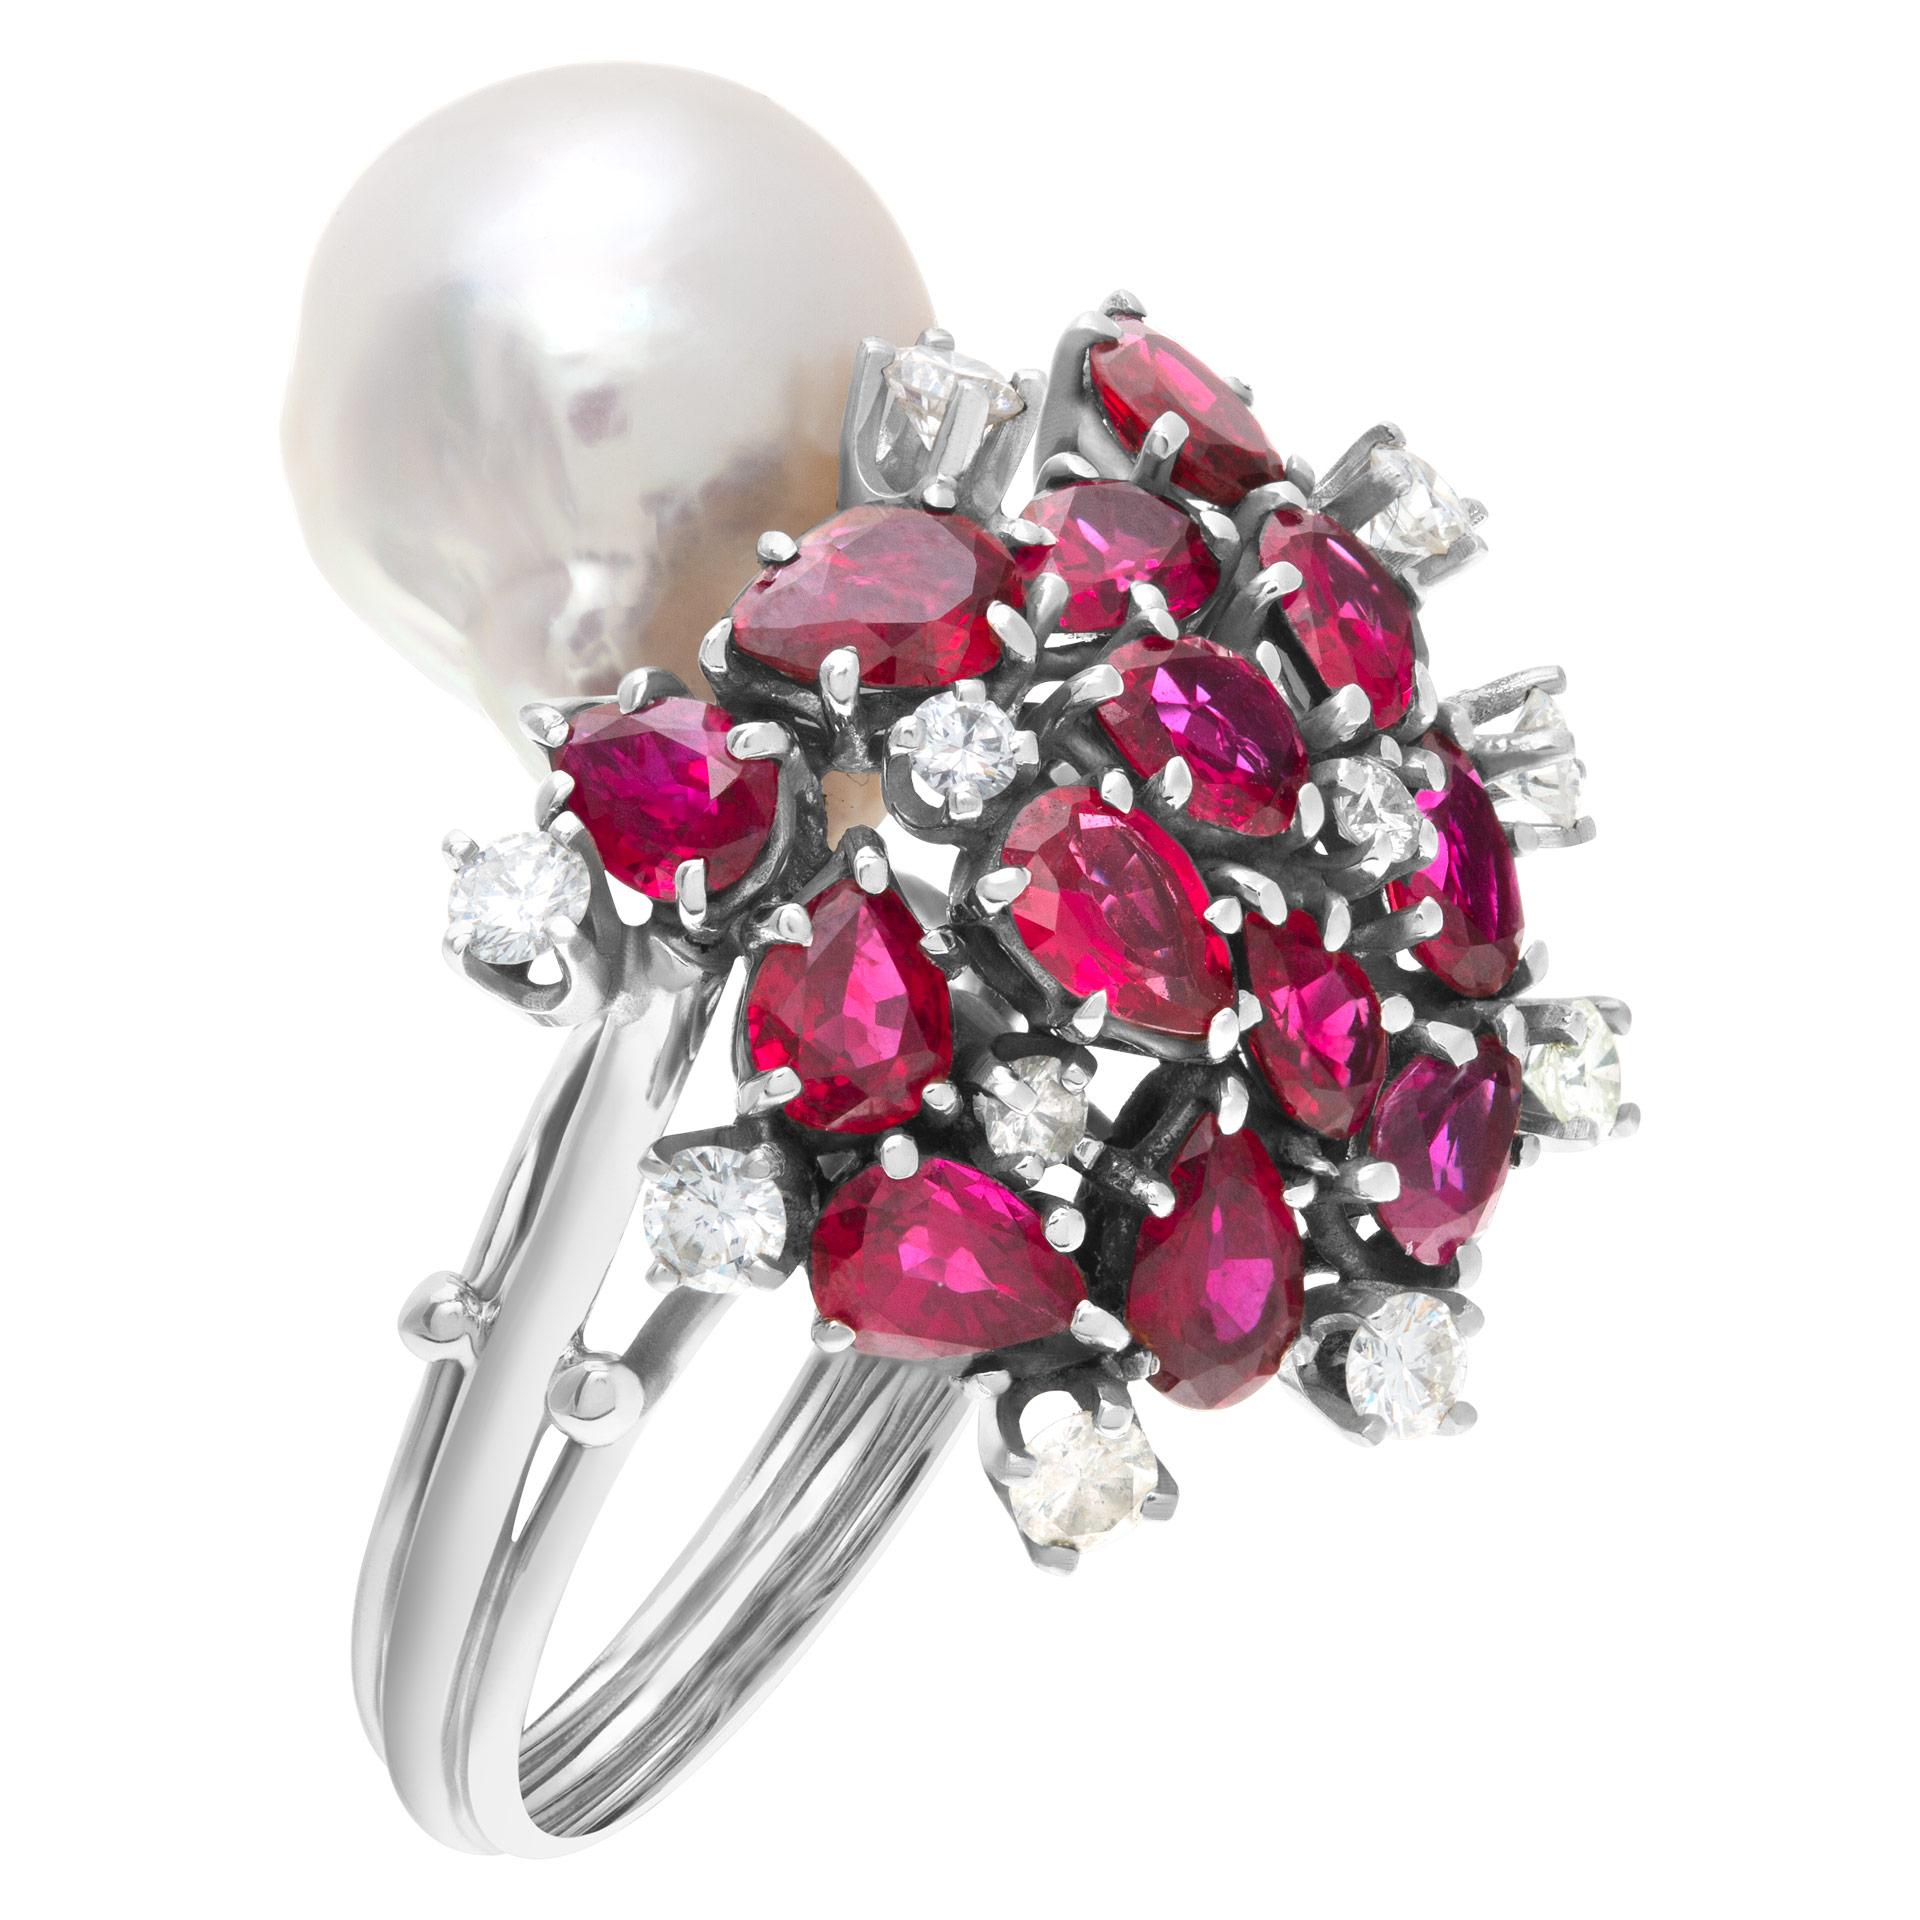 Baroque style South Sea pearl (12.9 x 15.6mm) ring in 14k white gold with multi cut rubies & approximately 0.30 carats in round diamond accents. Size 8.

This Diamond/Ruby/Pearl ring is currently size 8 and some items can be sized up or down, please